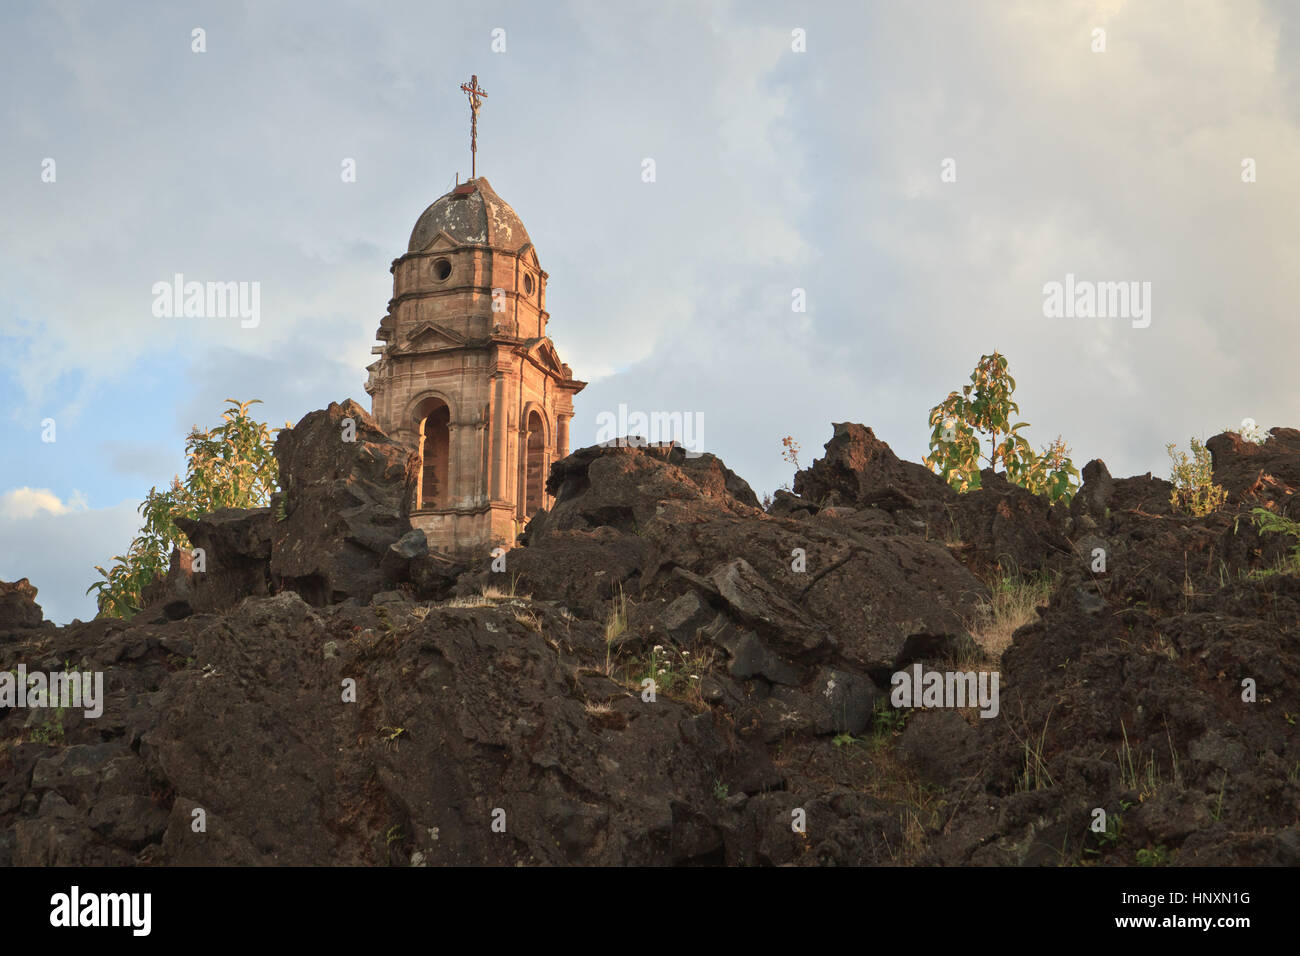 Lava covered ruins of Church, Mexico Stock Photo